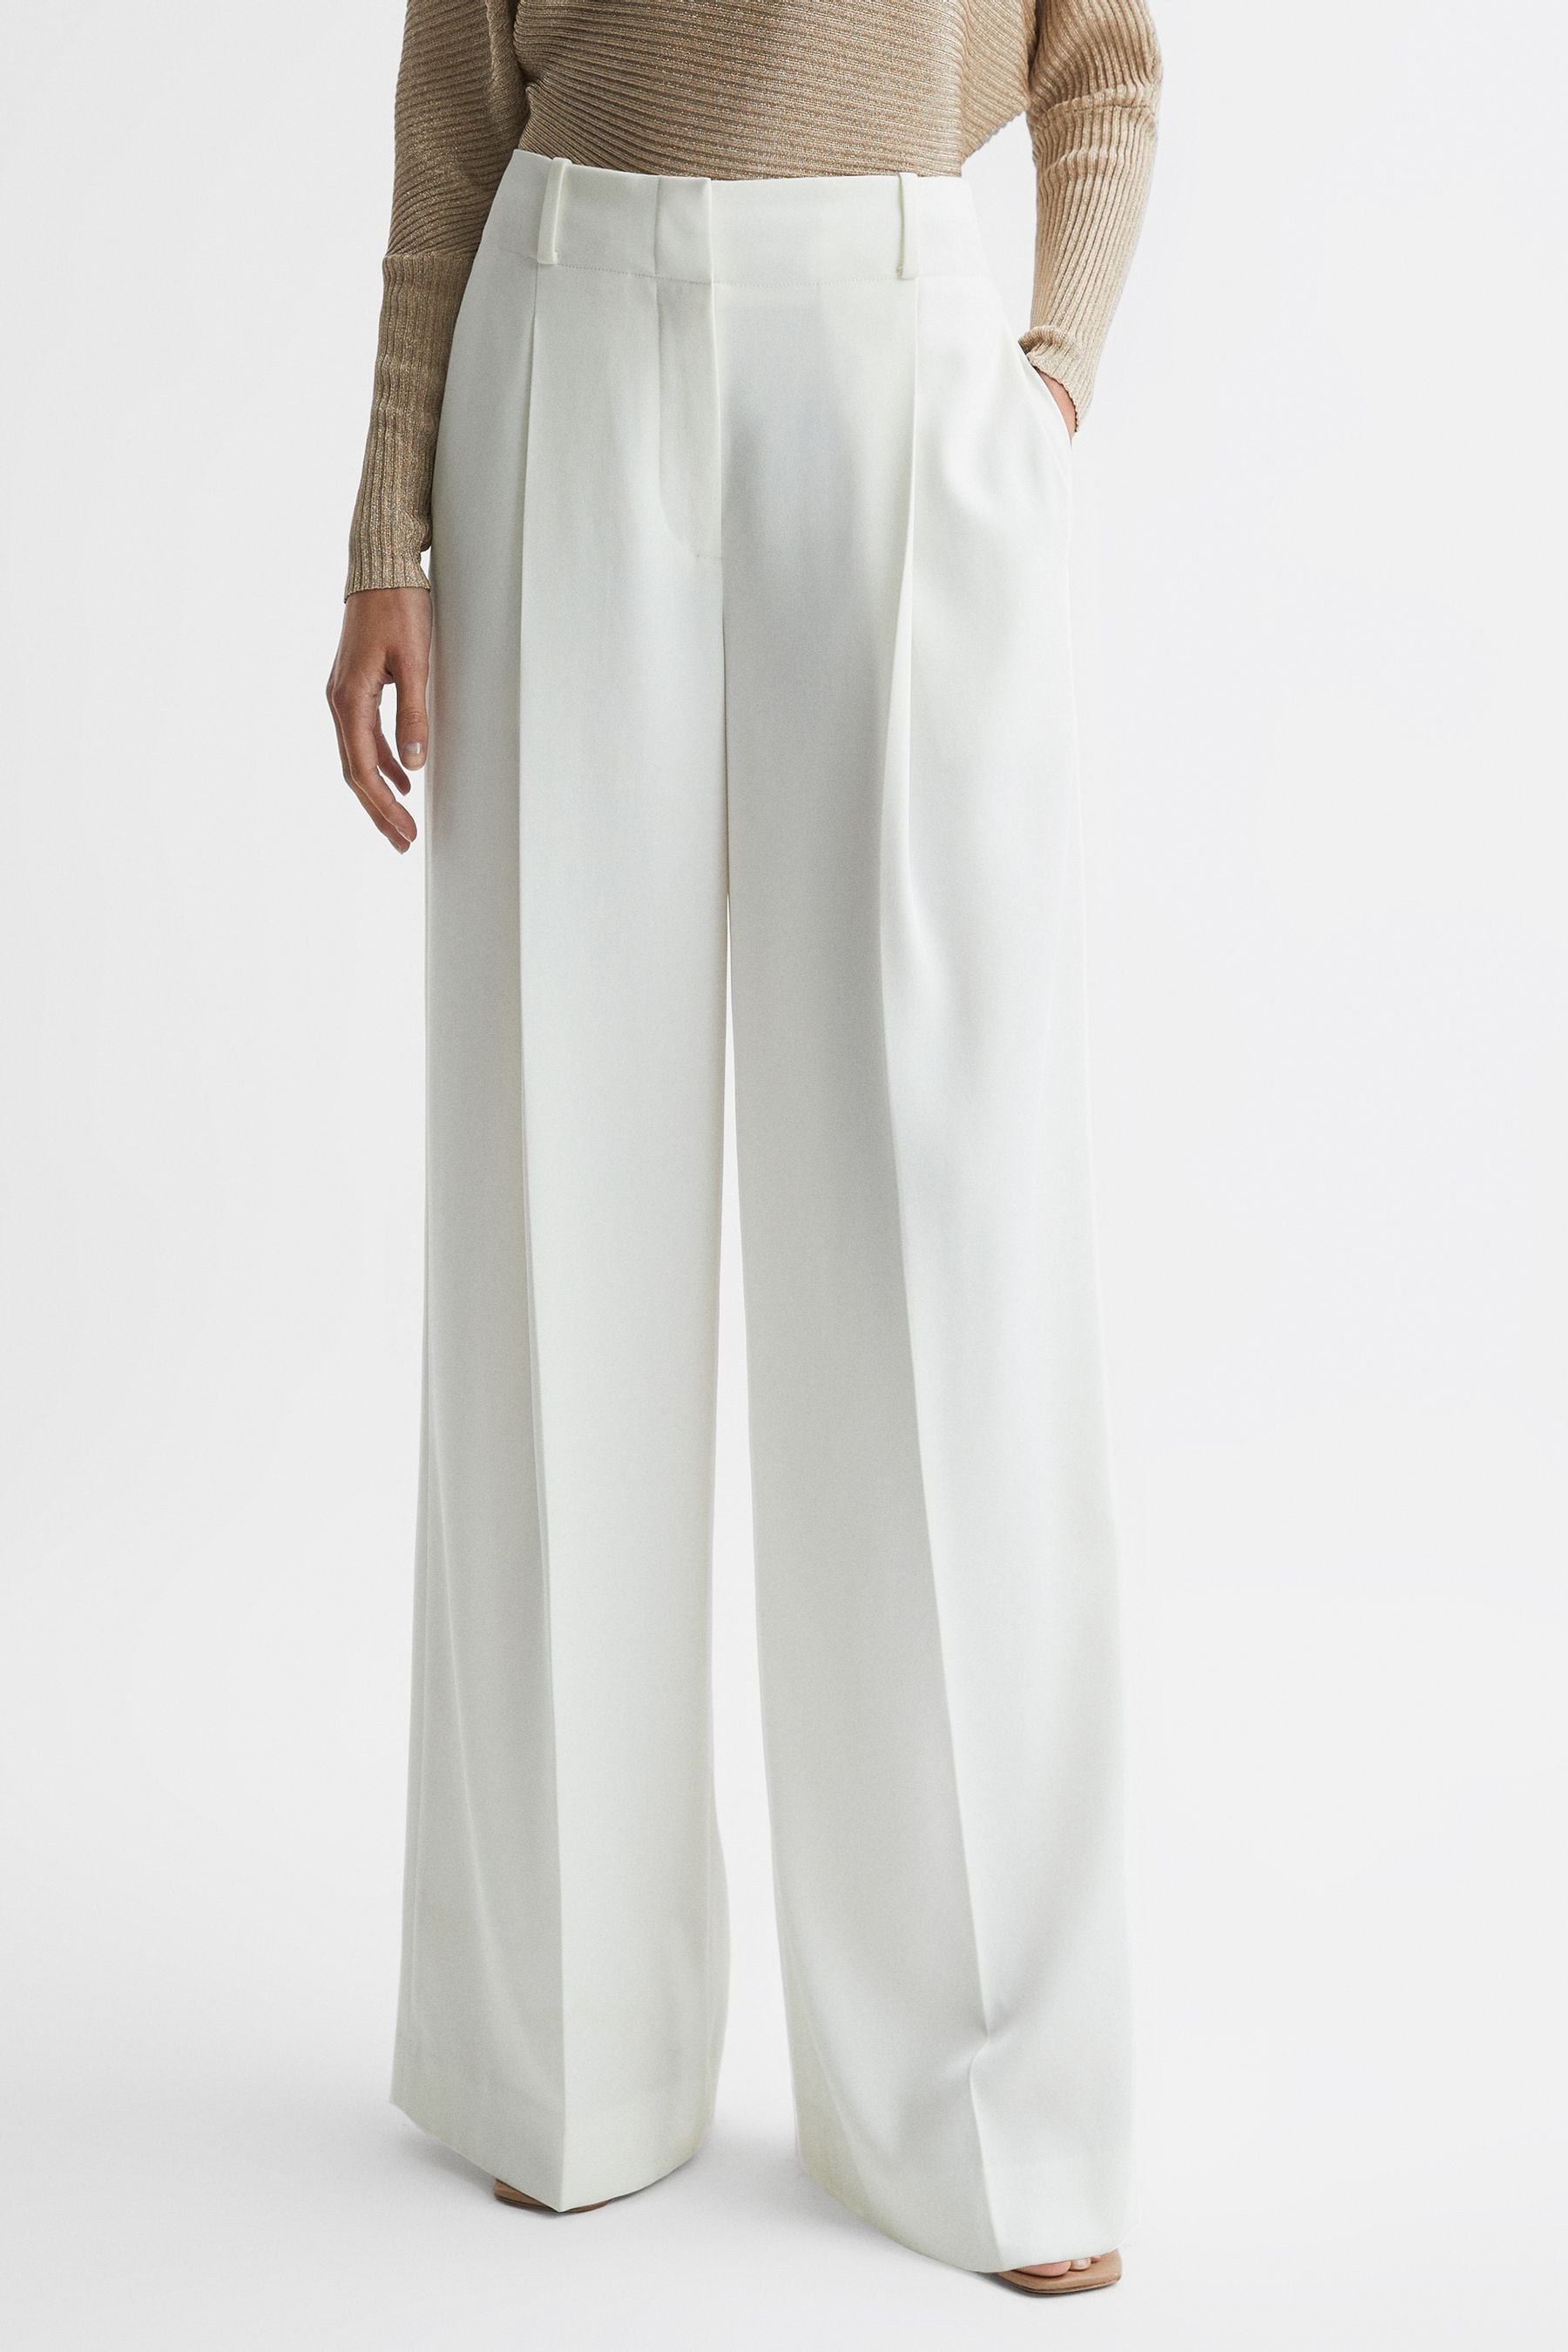 Reiss Lillie - White Mid Rise Wide Leg Trousers, Us 4